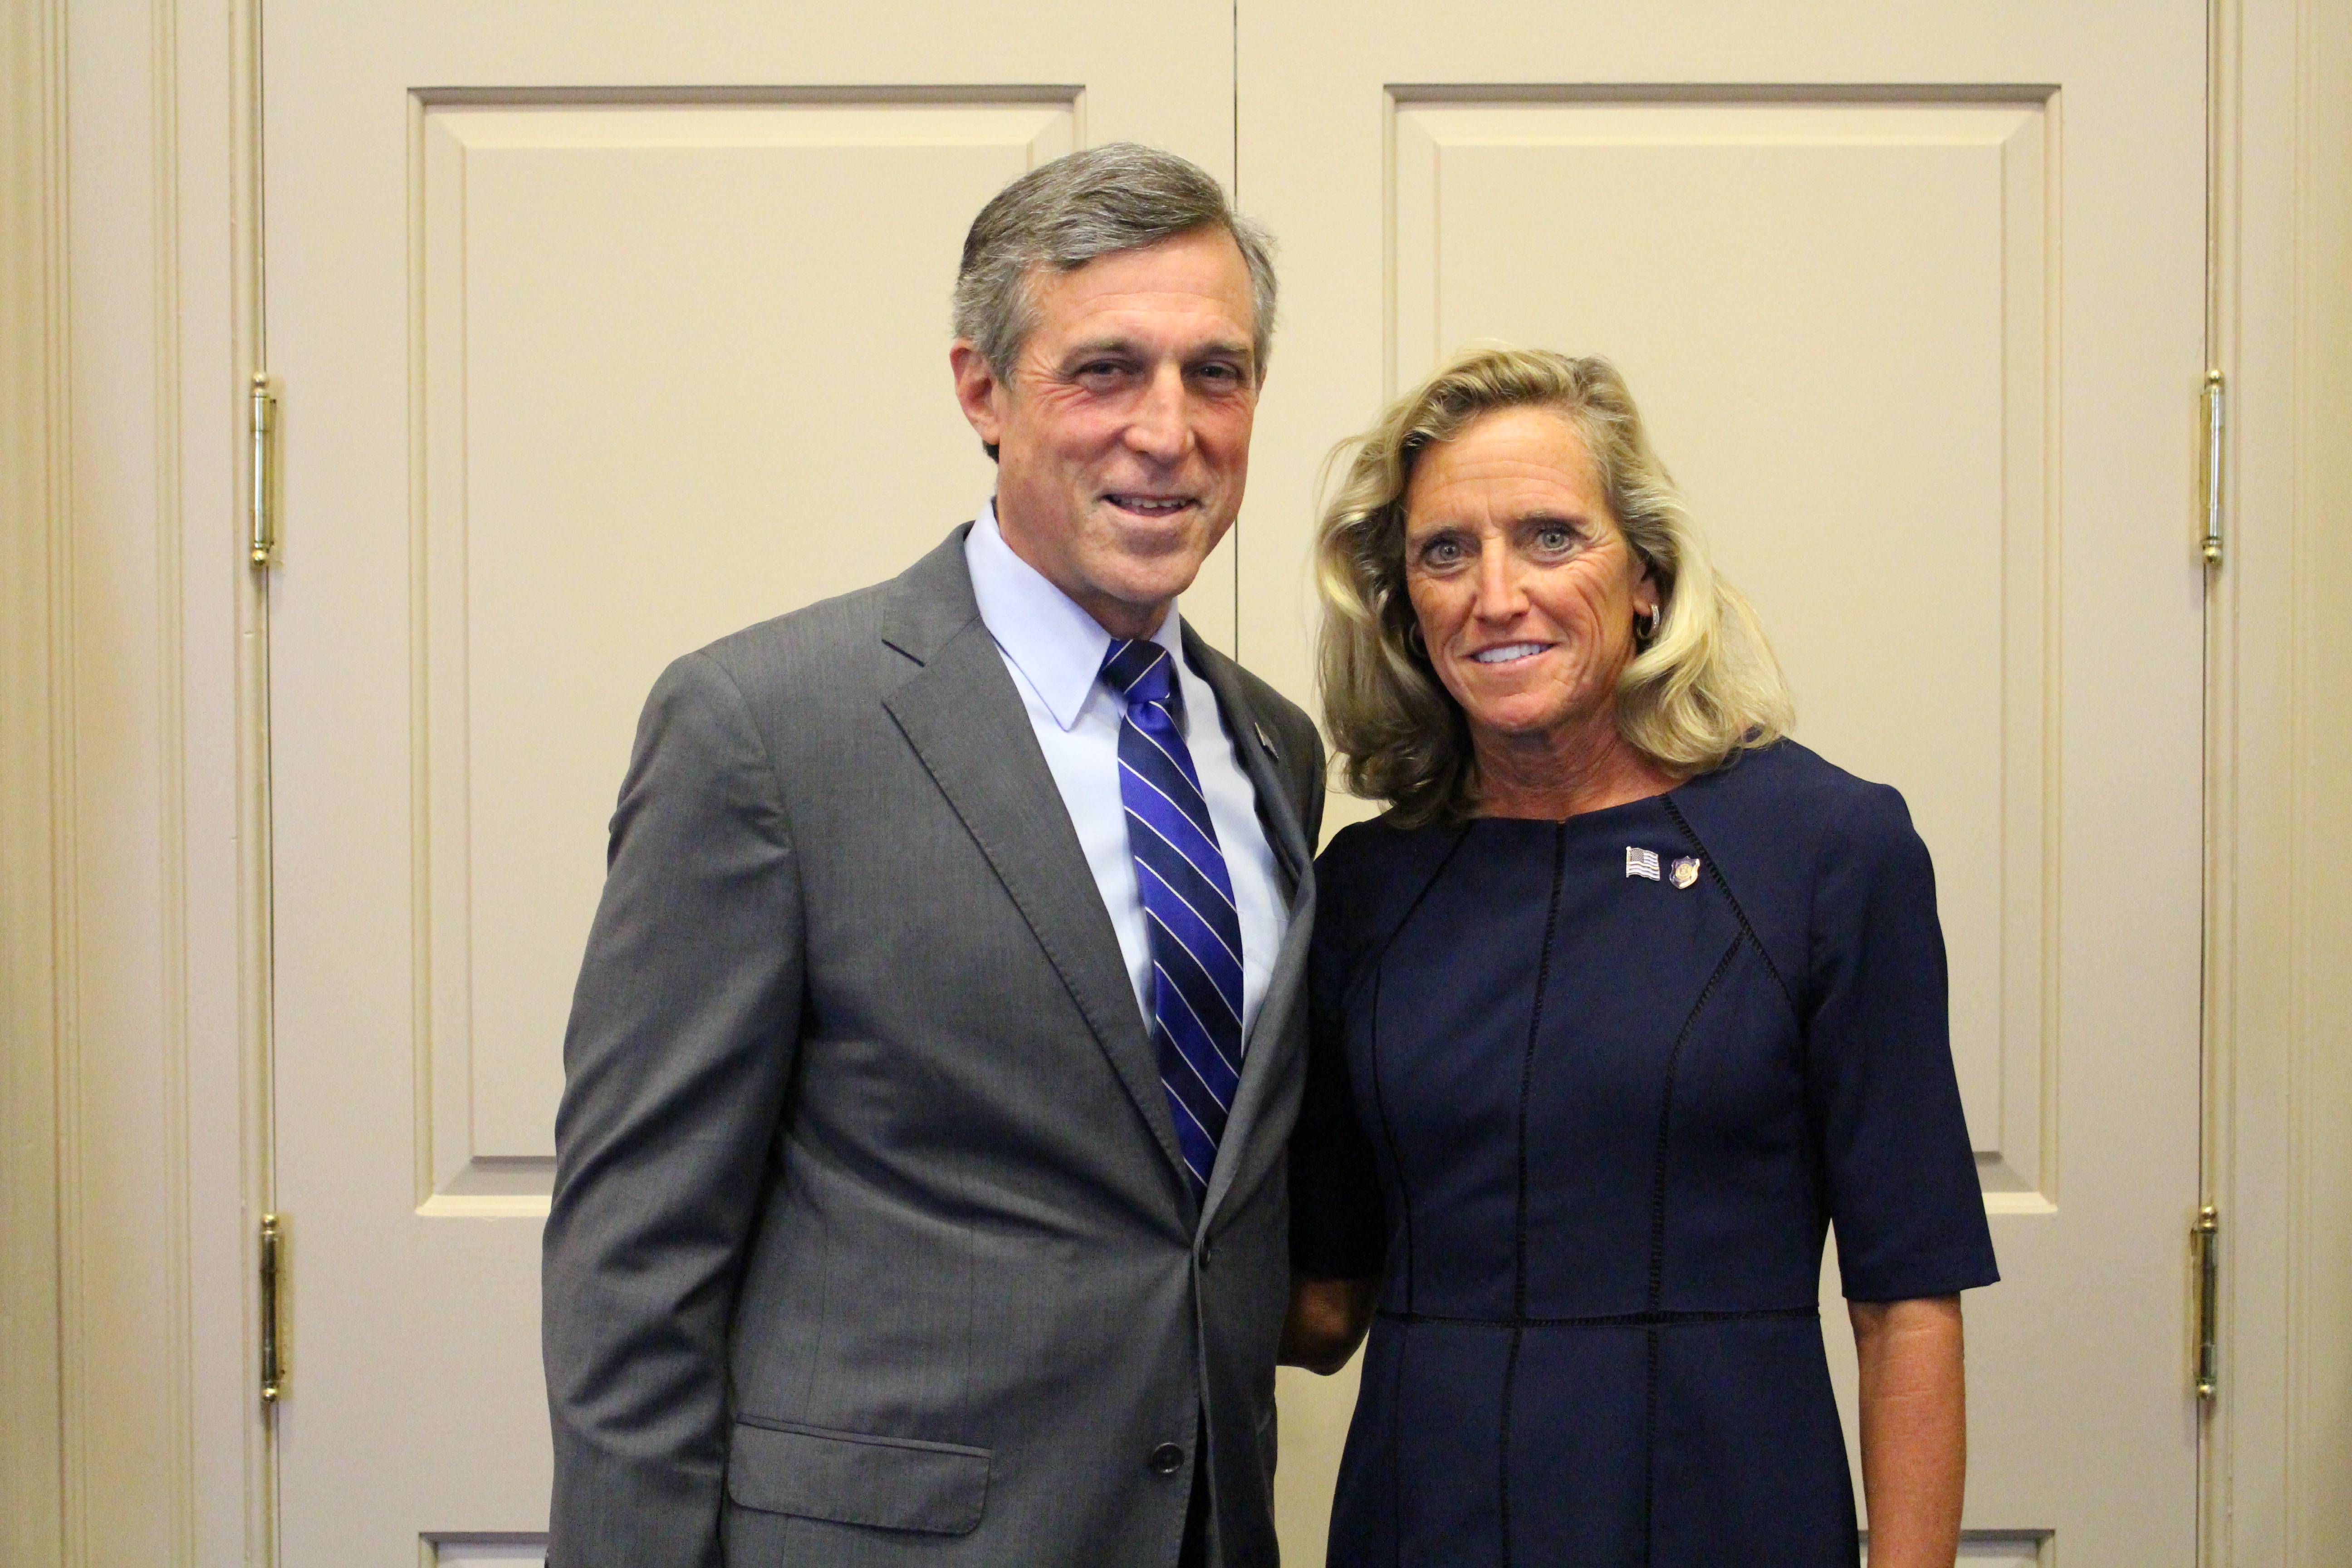 Governor Carney and Claire DeMatteis